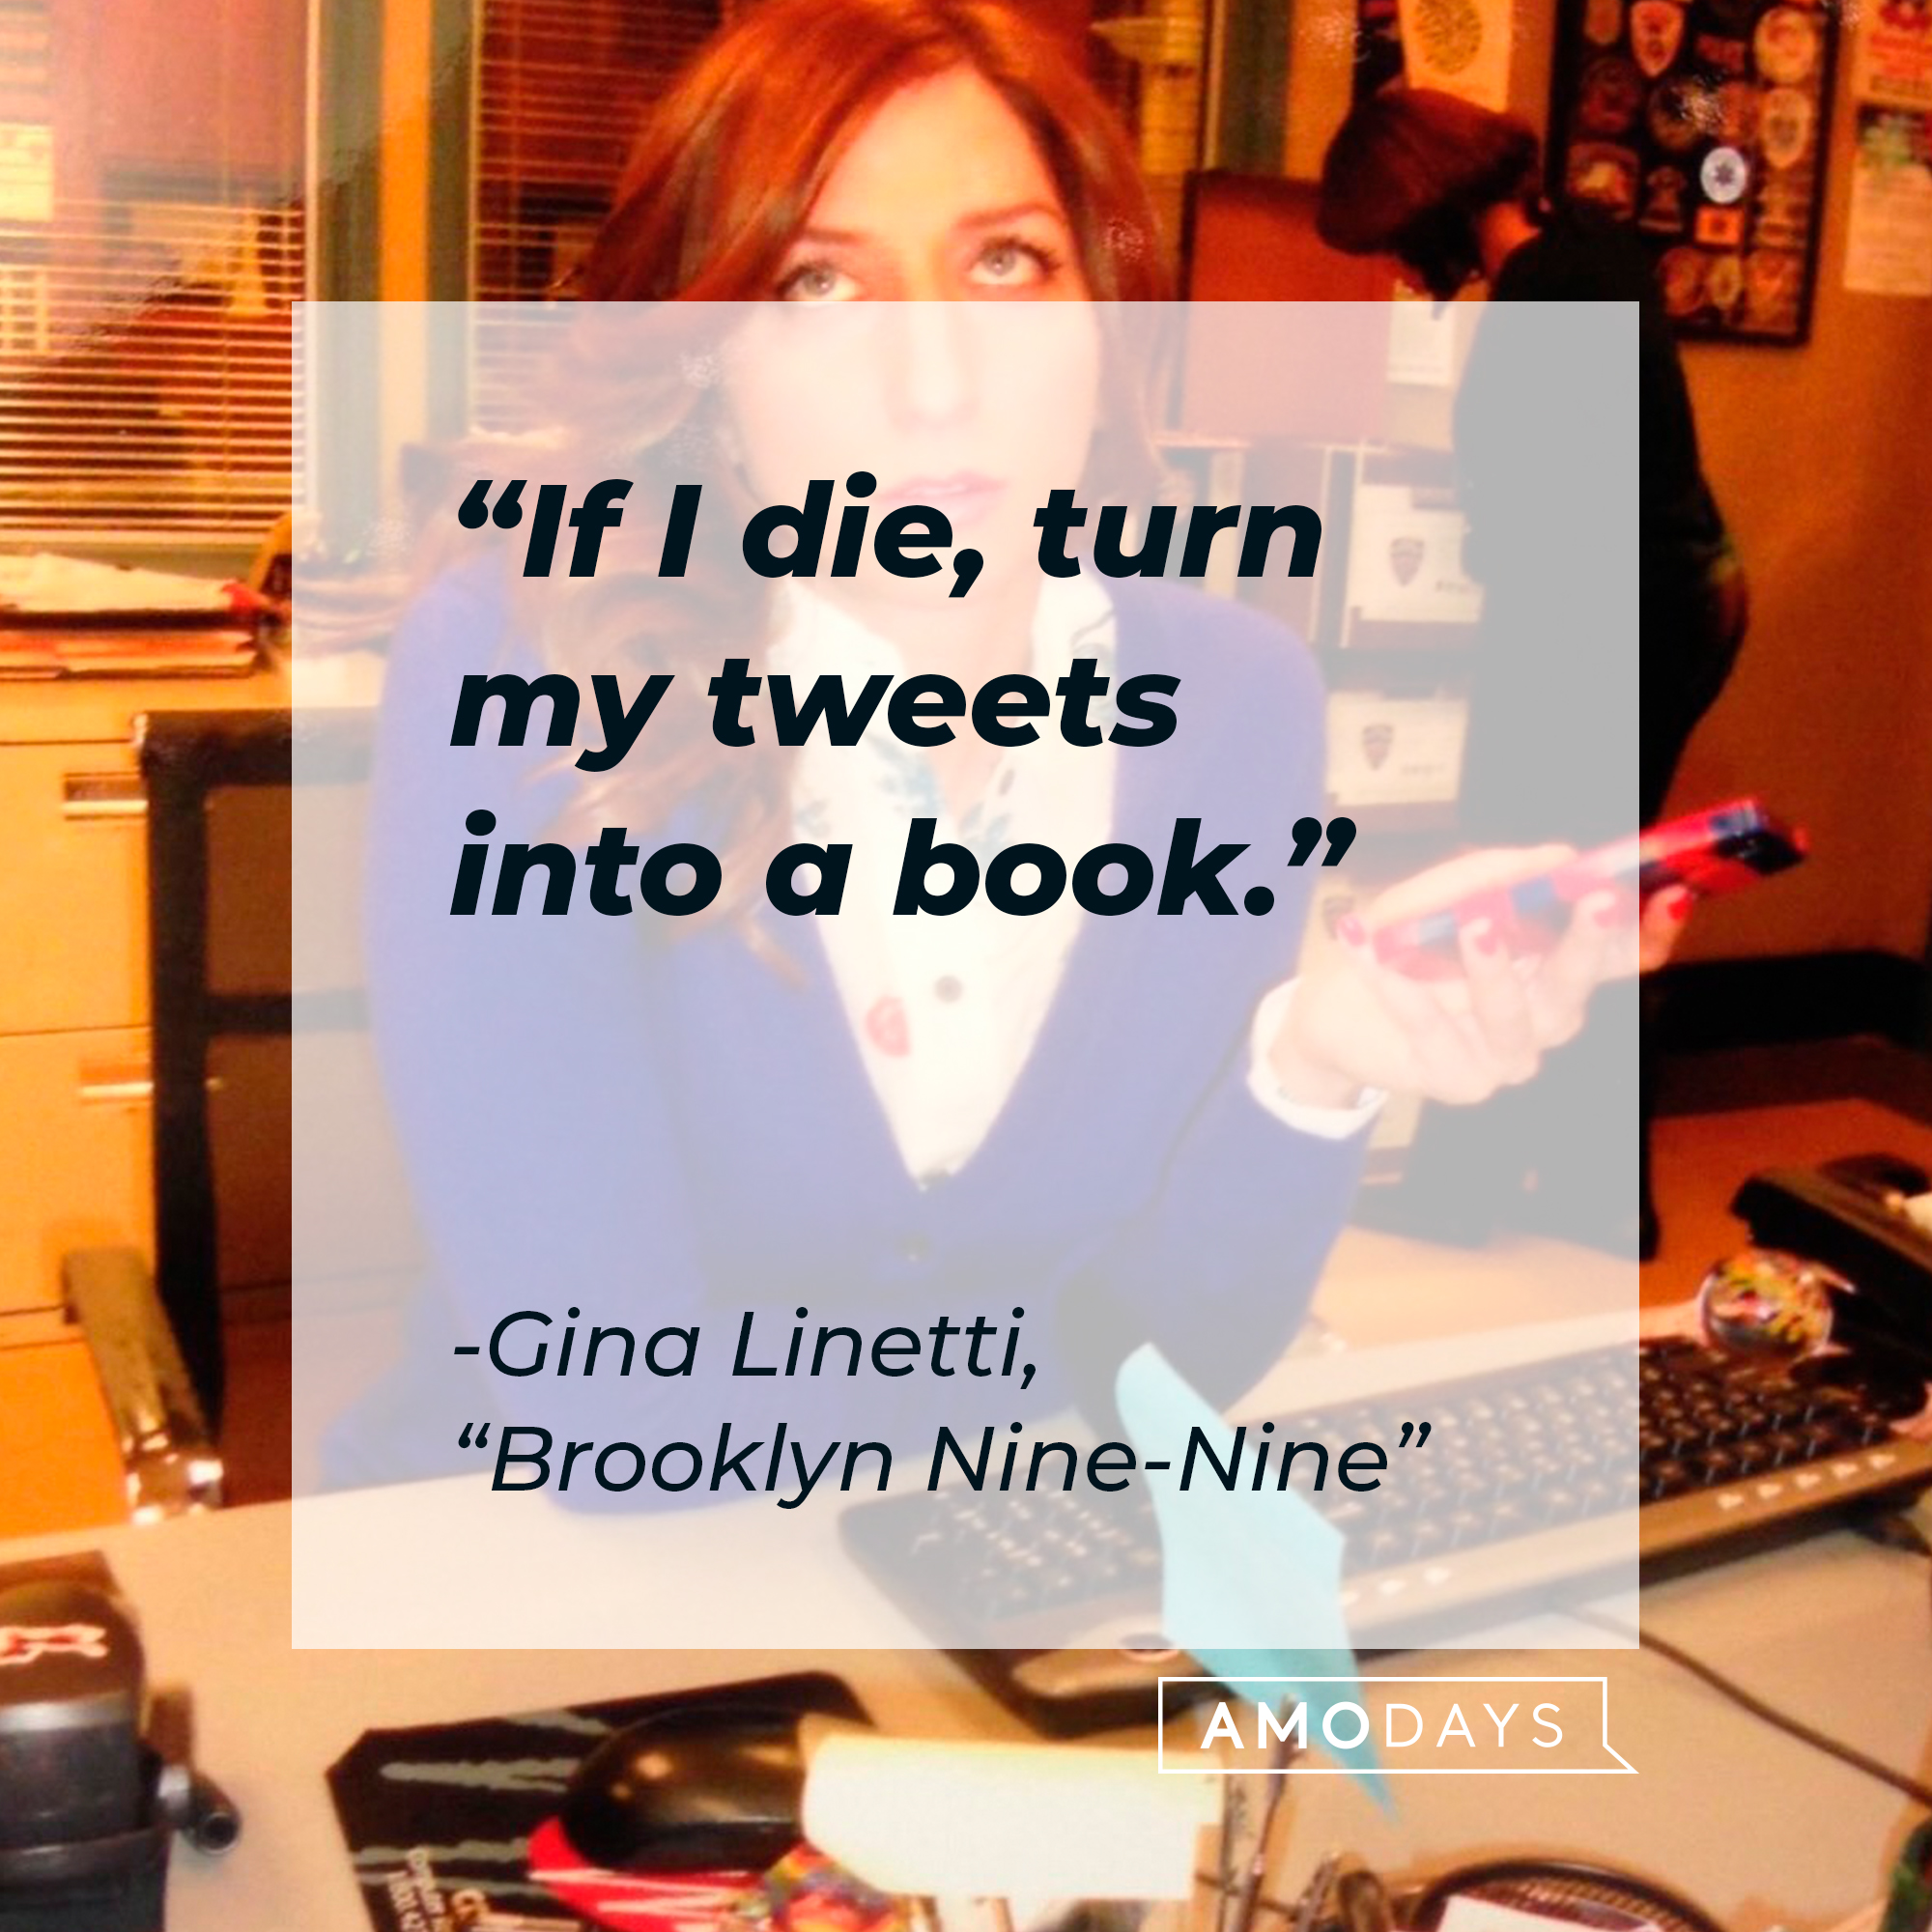 Gina Linetti with her quote: "If I die, turn my tweets into a book." | Source: Facebook.com/BrooklynNineNine